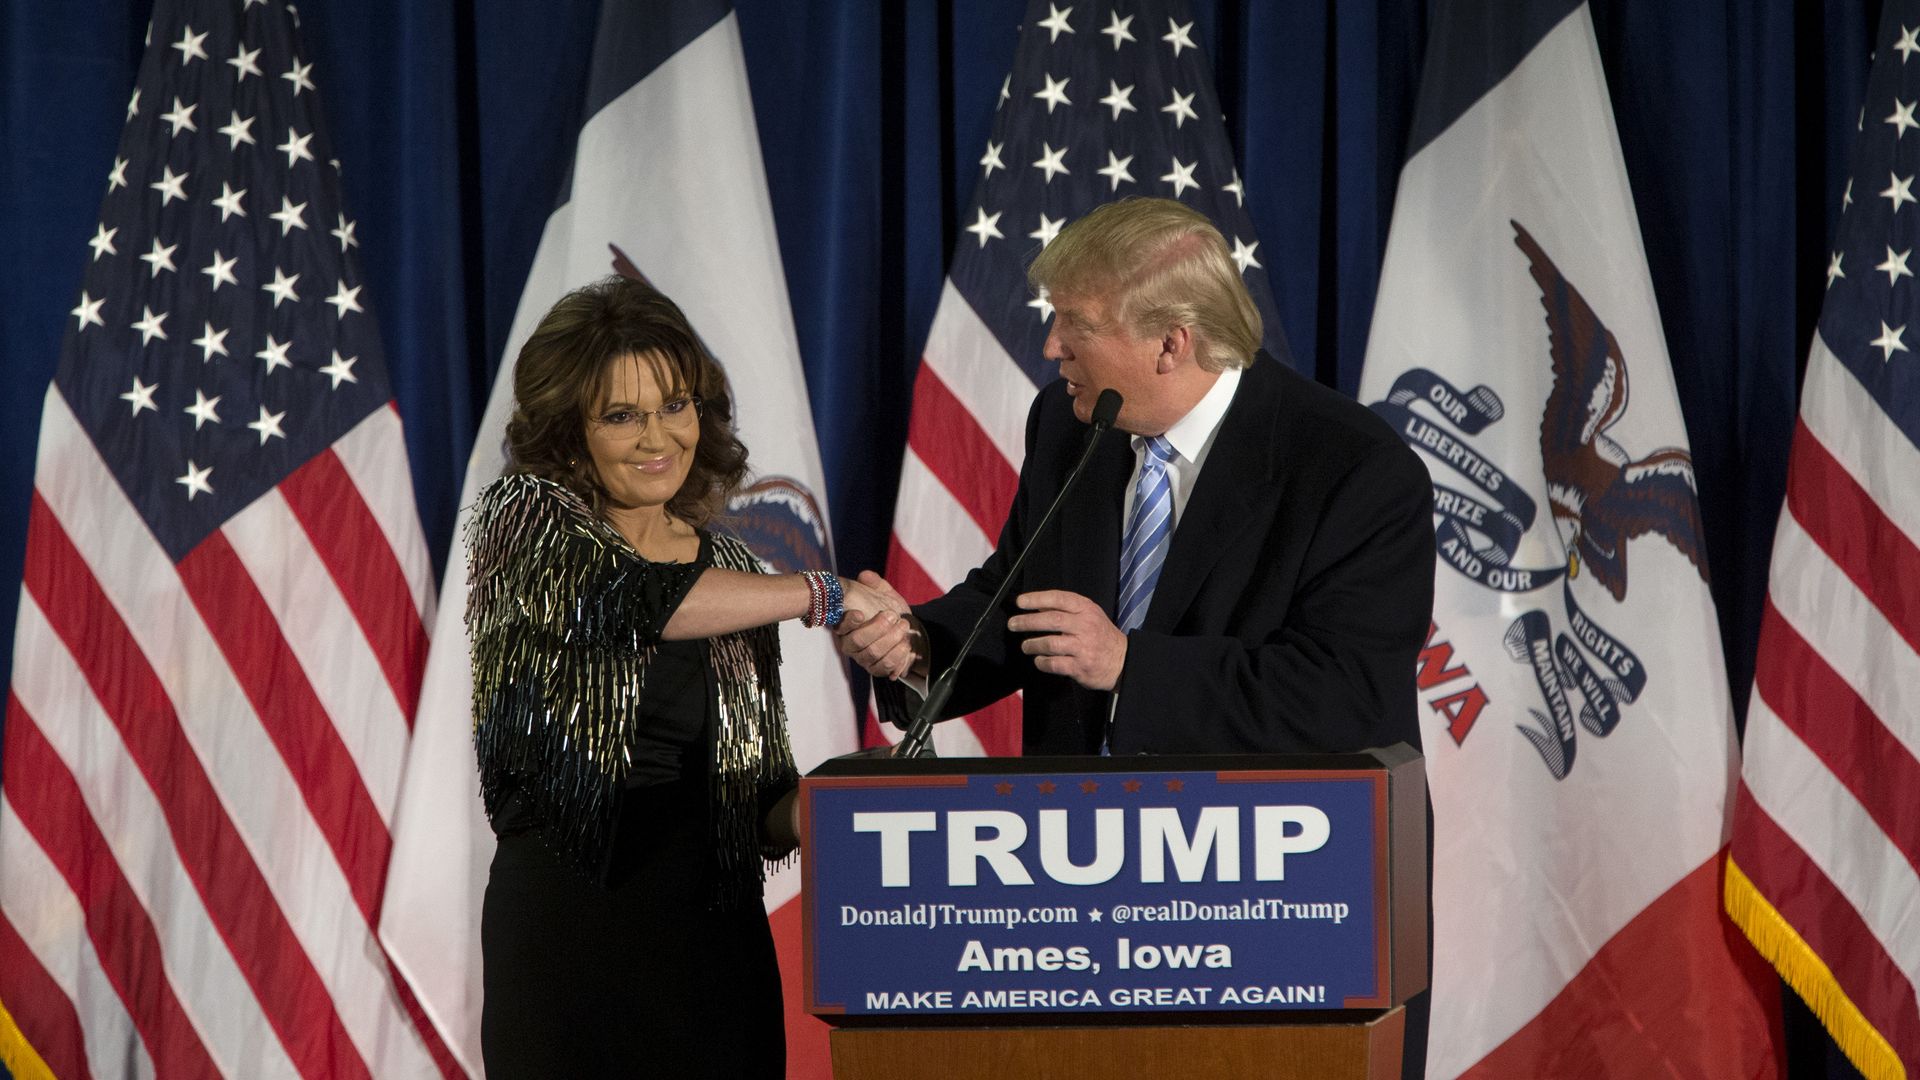  Republican presidential candidate Trump with former Alaska Gov. Sarah Palin on January 19, 2016 in Ames, IA. 